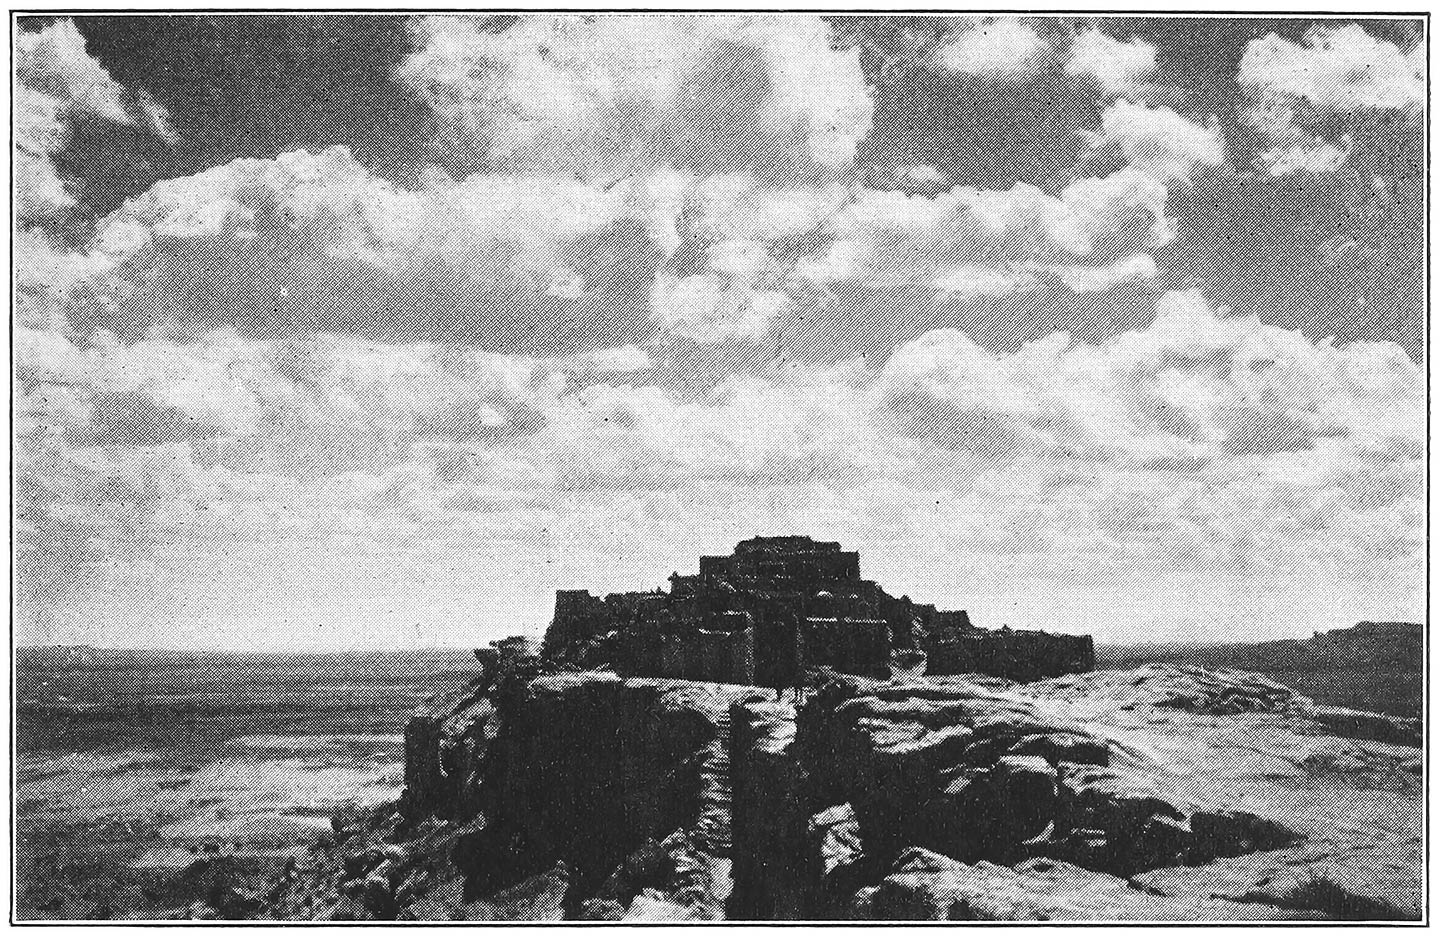 WALPI, THE PUEBLO OF THE CLOUDS